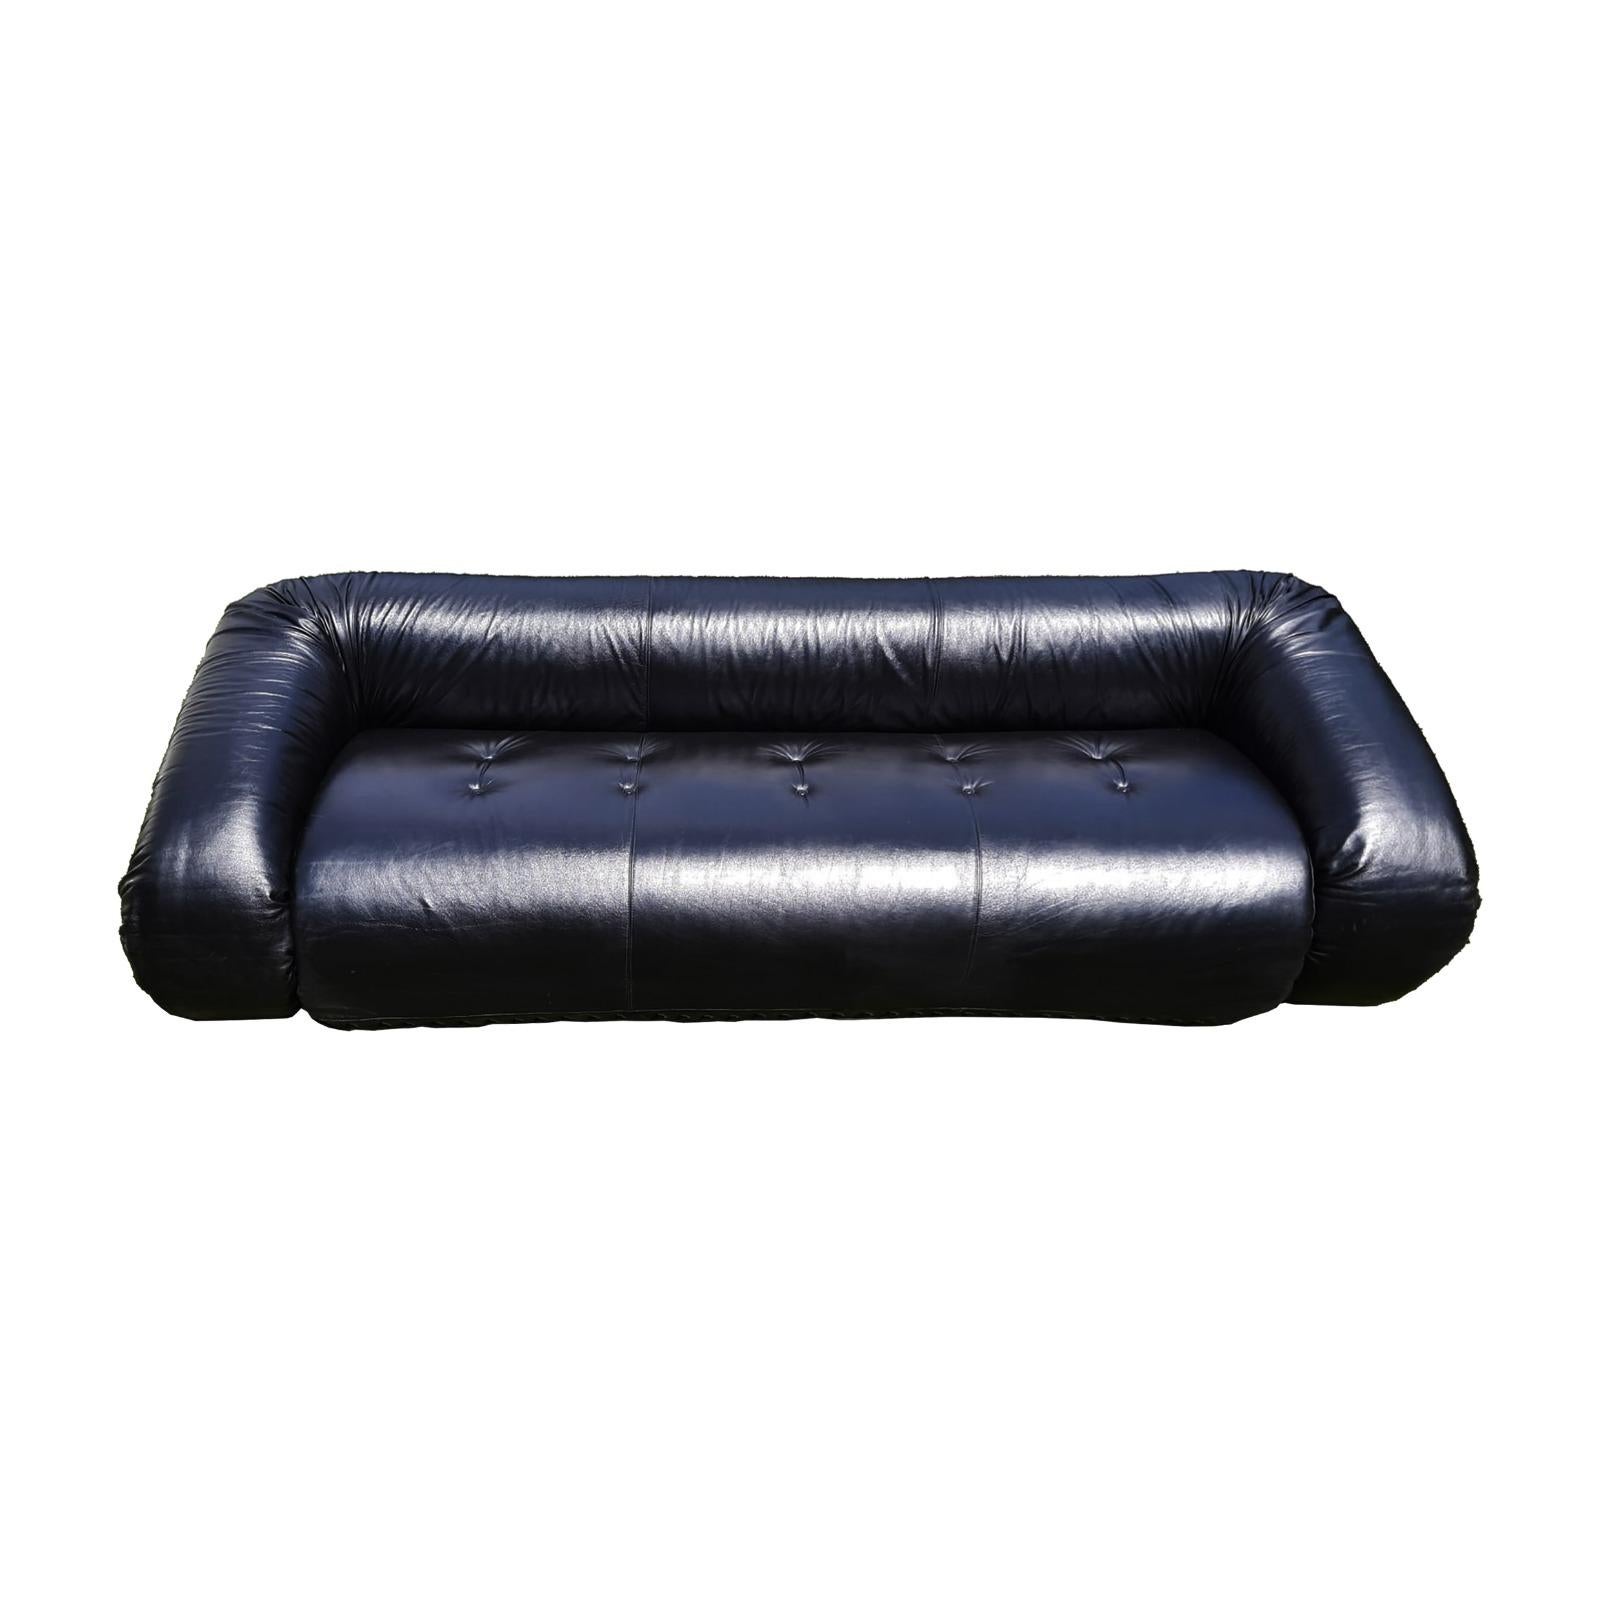 Anfibio sofa-bed by Alessandro Becchi for Giovannetti, 1972.

Fully restored and upholstered with high-quality black Italian natural leather.

Mattress upholstered with soft sheepskin wool.

The Anfibio sofa ranks among the most outstanding